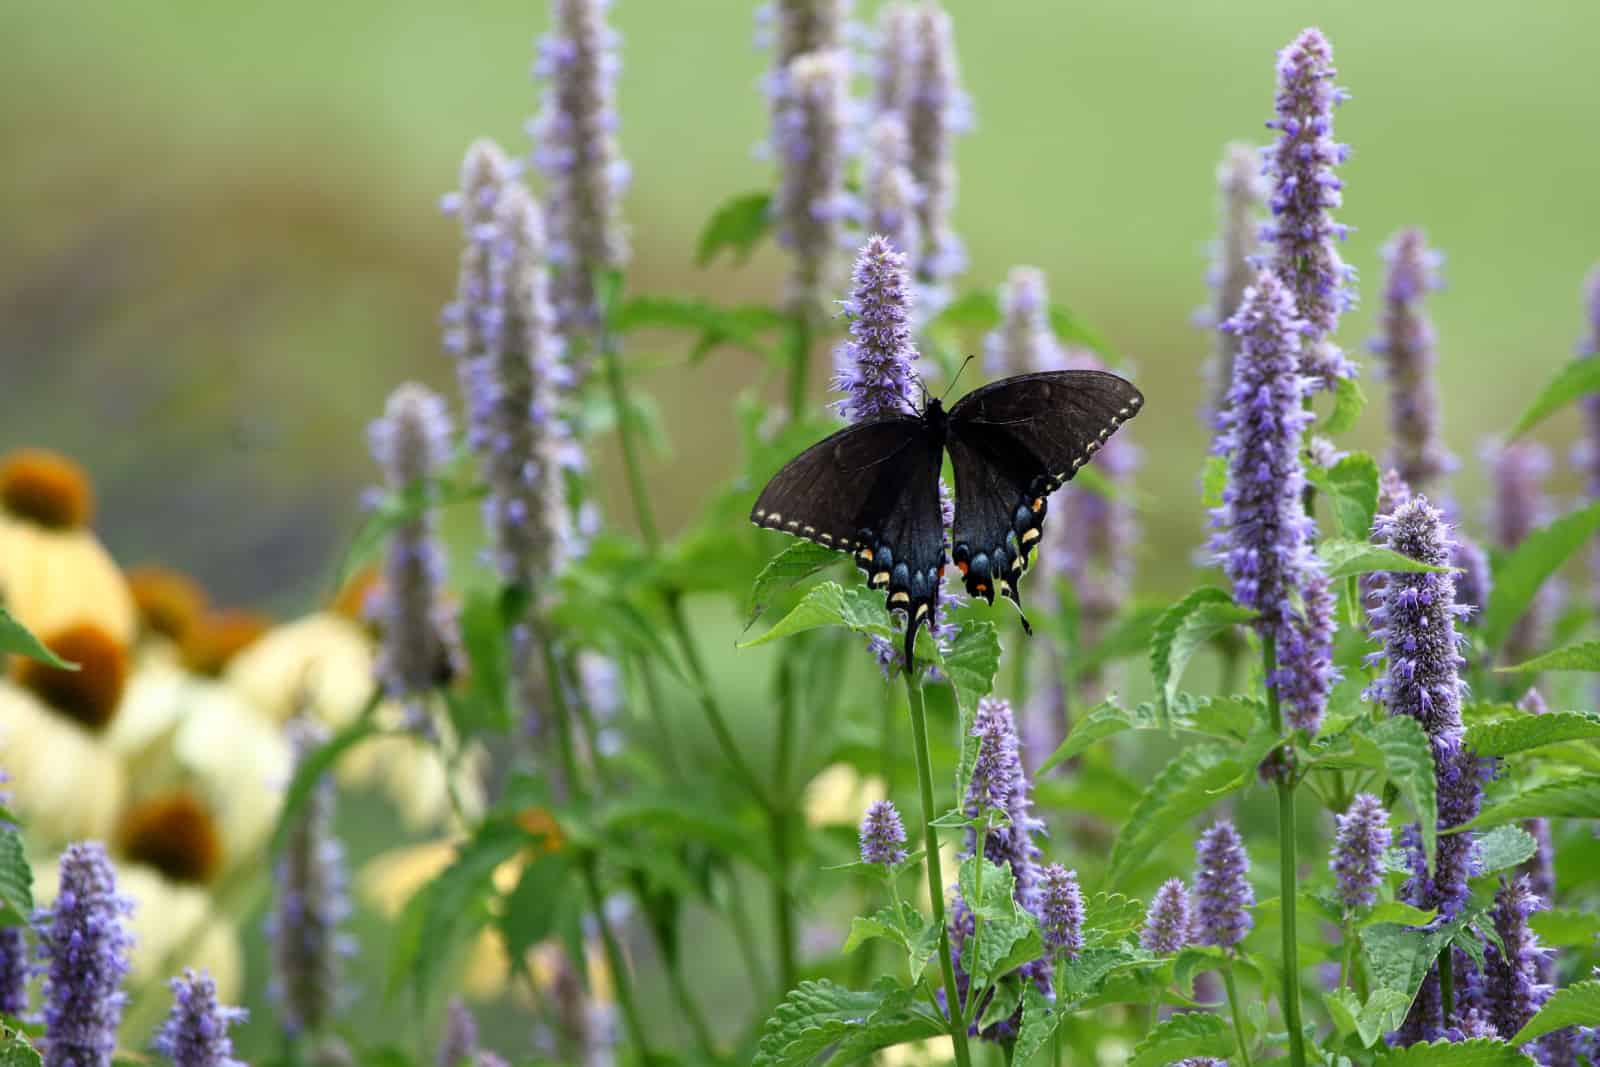 A Black Swallowtail Butterfly Feeds on Anise Hyssop